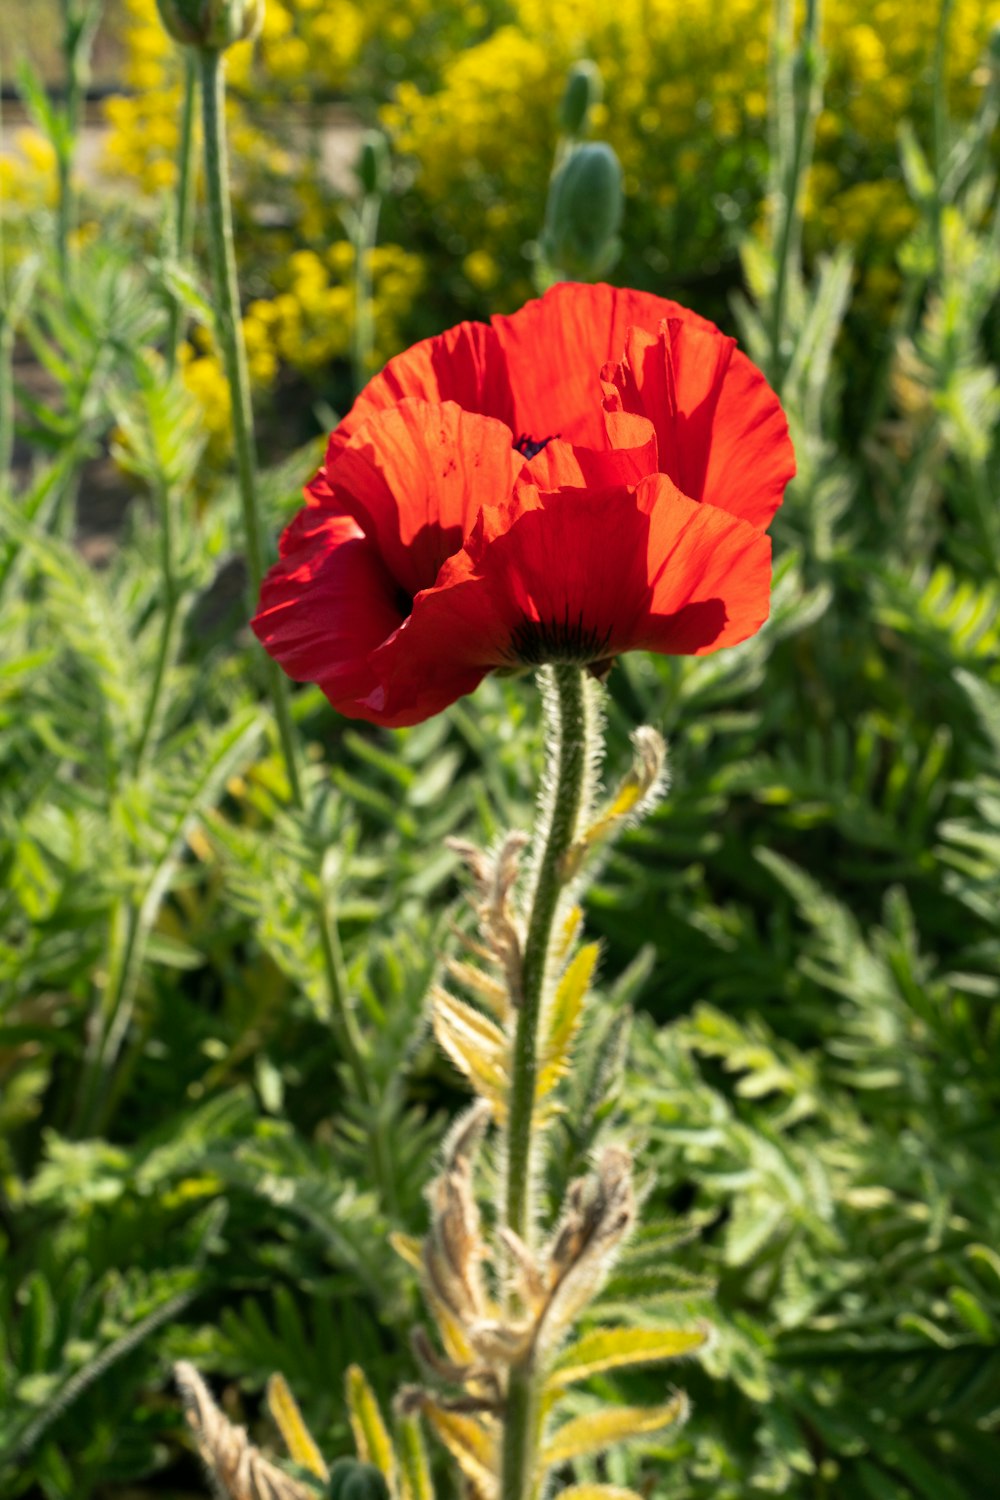 a red flower in a field of yellow flowers